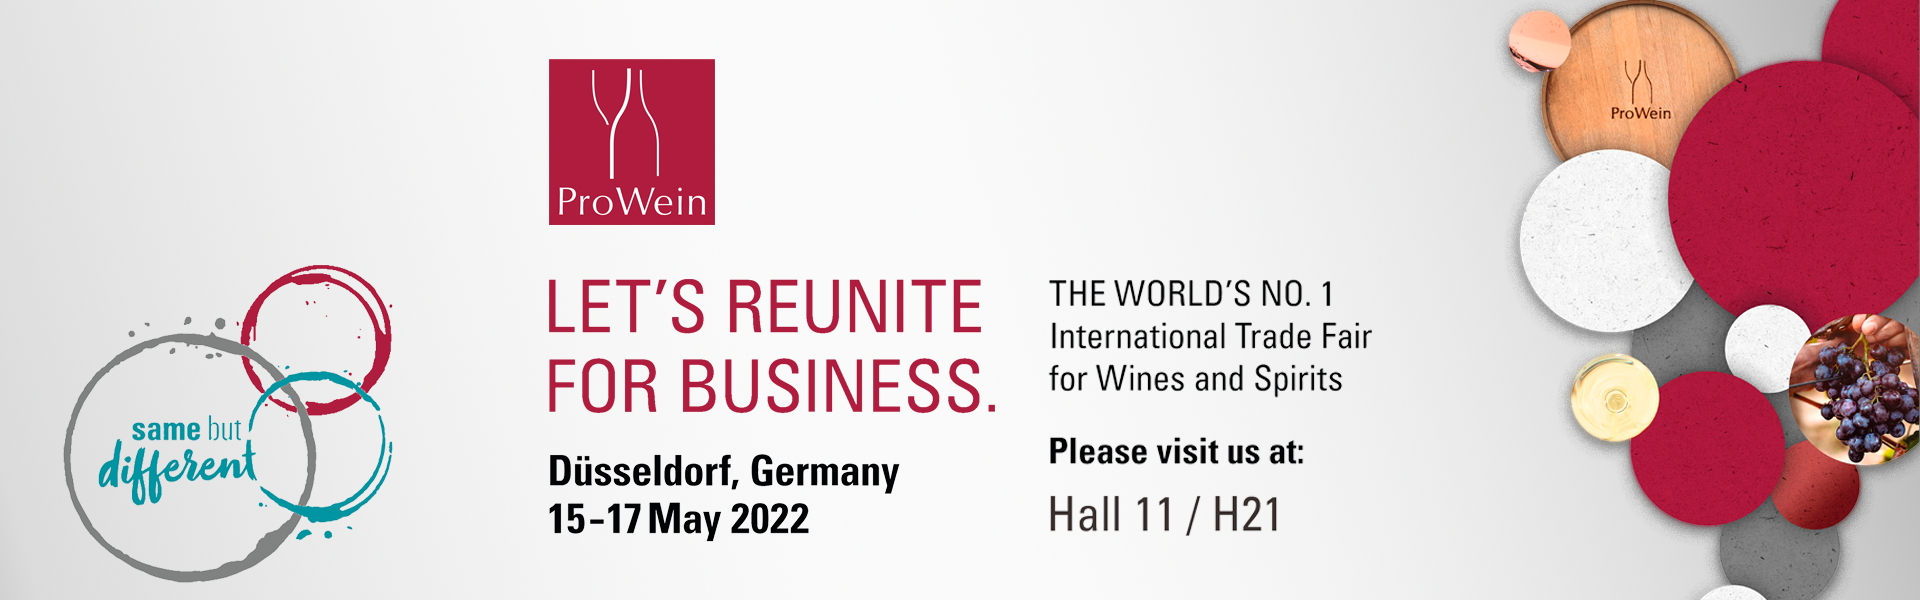 Our wines will be displayed at the ProWein 2022 exhibition in Dusseldorf Germany